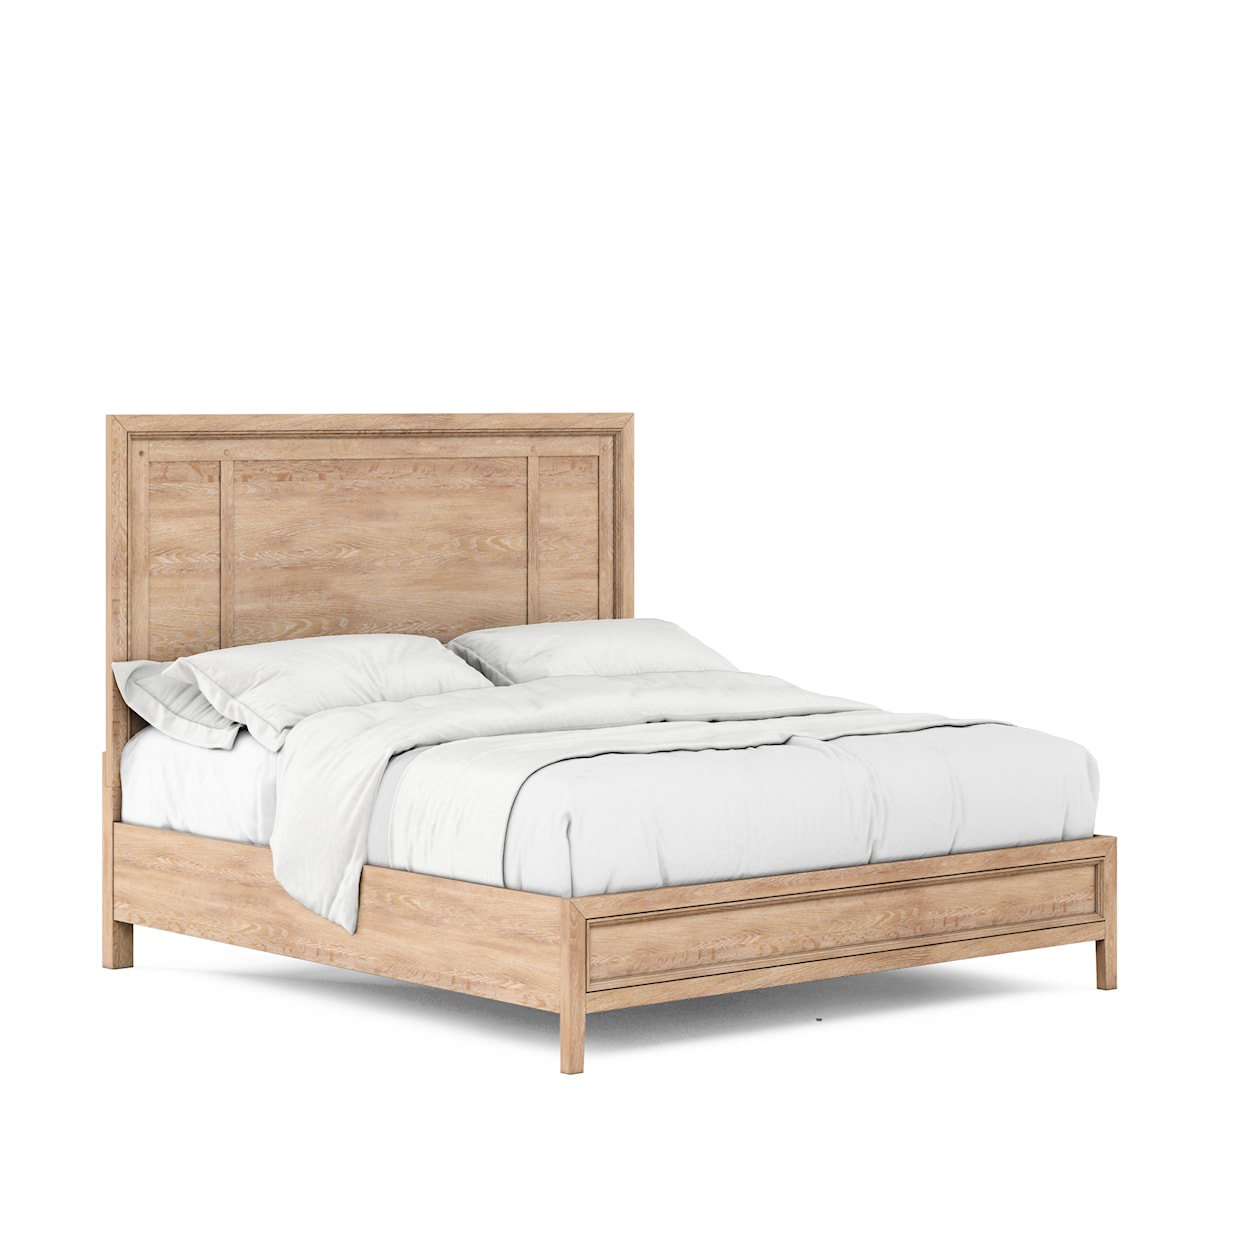 A.R.T. Furniture Inc Post King Panel Bed